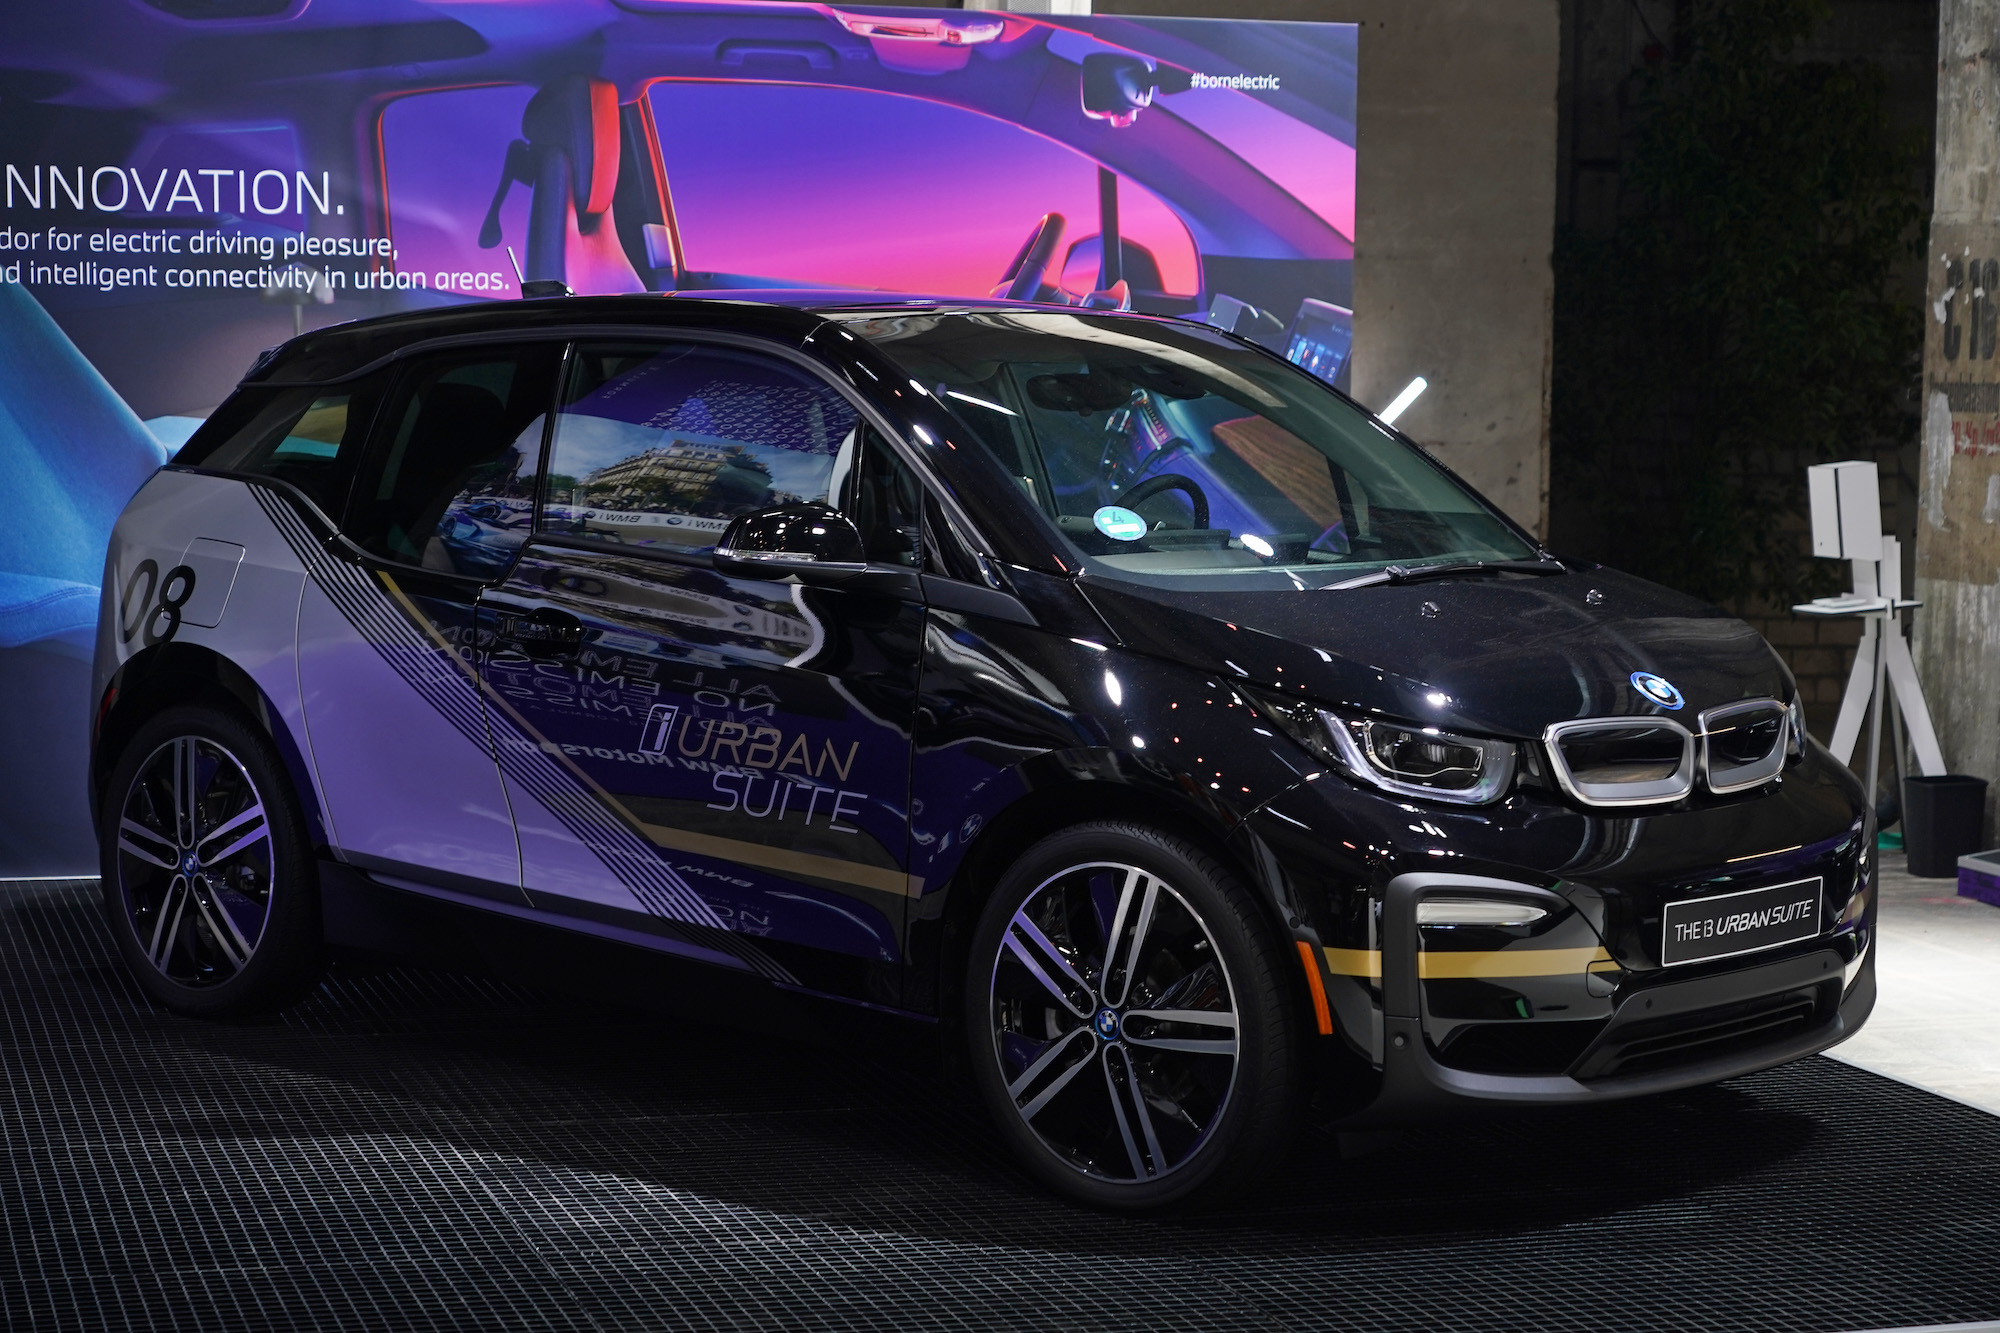 A BMW i3 Urban Suite electric car stands on display at a press preview at the Greentech Festival on September 16, 2020, in Berlin, Germany.